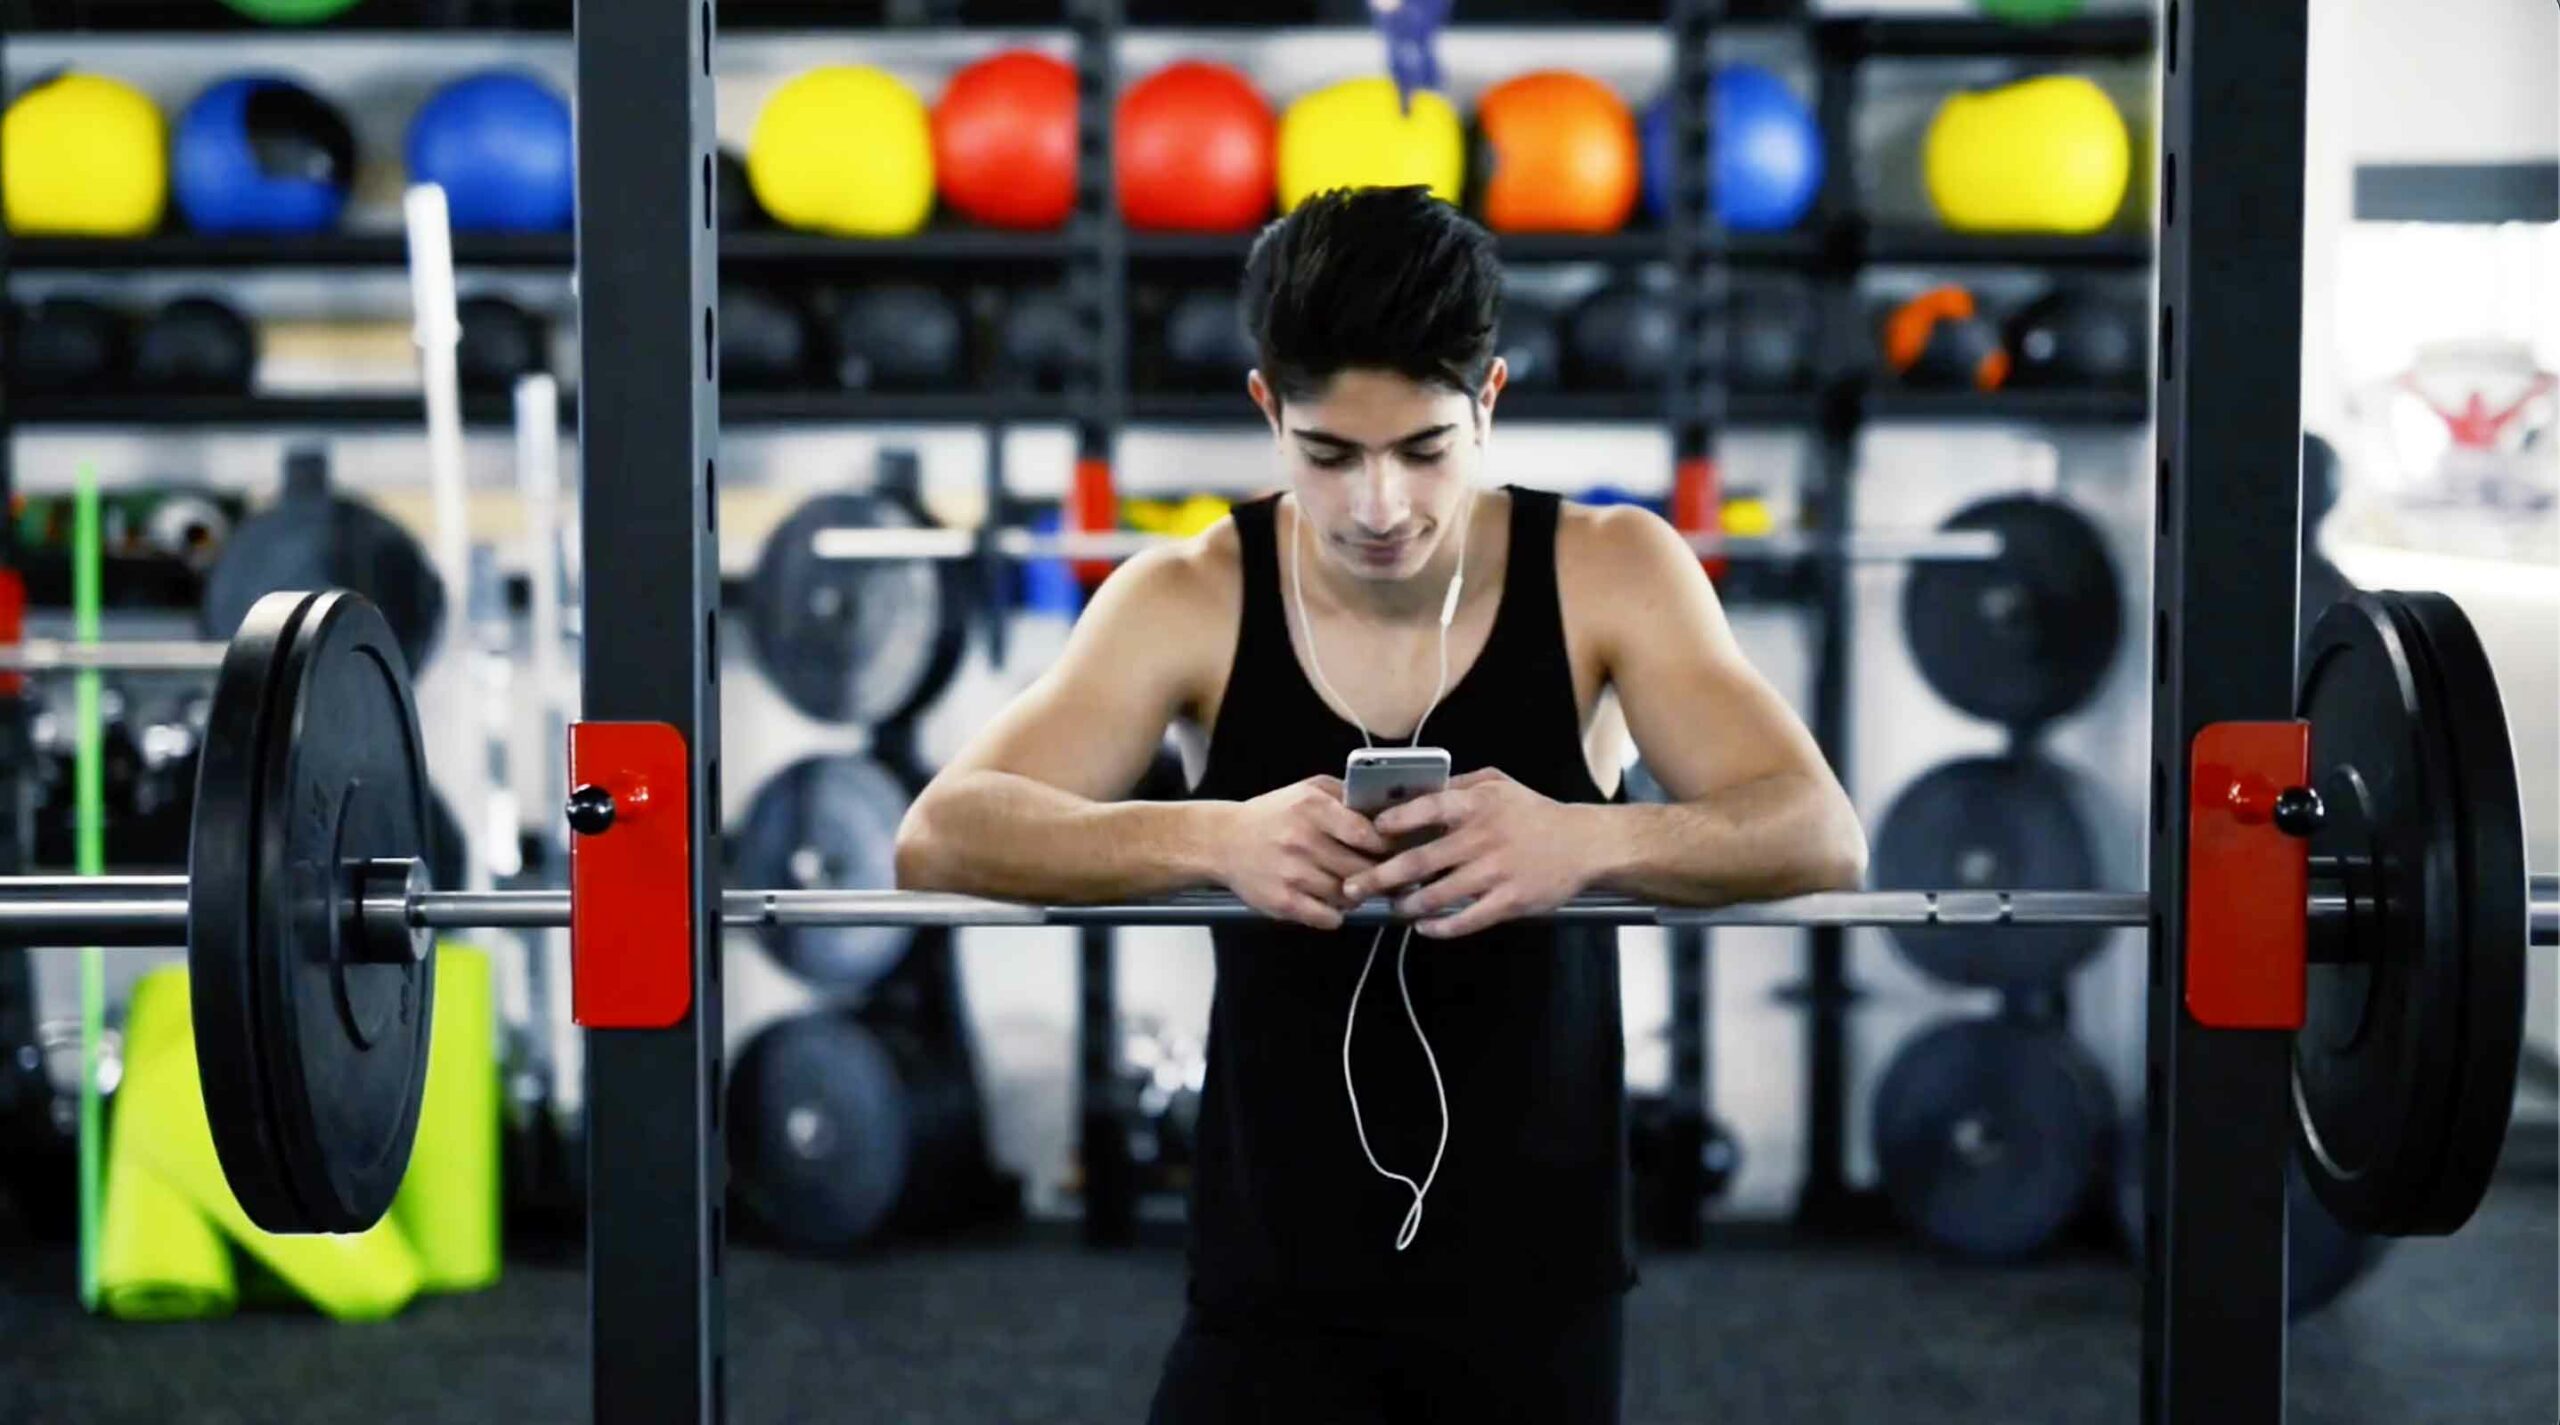 How does social media and gaming affect athletes’ performance?